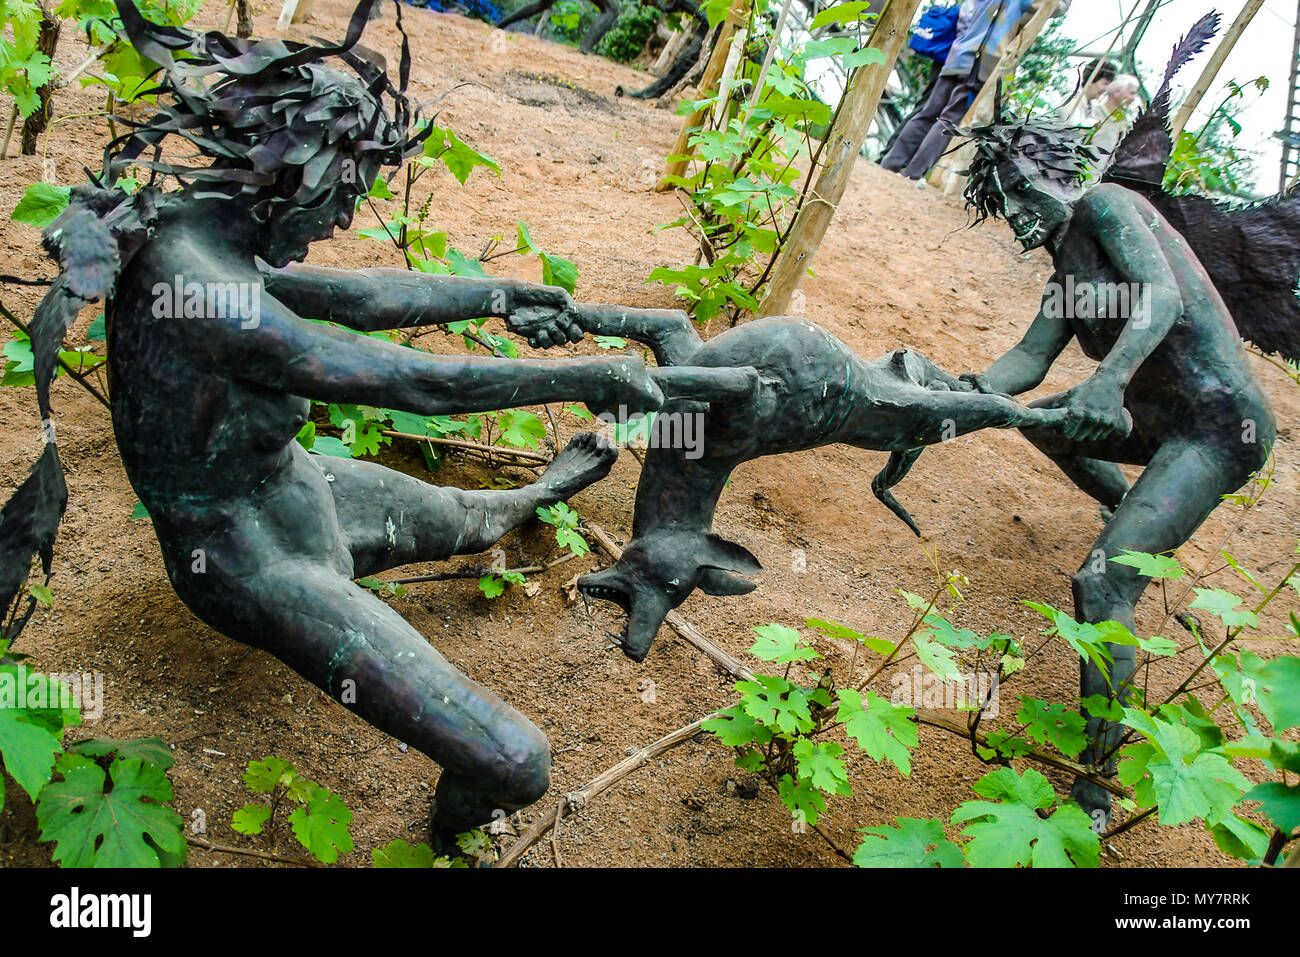 The Rites of Dionysus sculpture by Tim Shaw inside the Mediterranean Biome Bio Dome Eden Project, Cornwall. Copper beaten figures Stock Photo